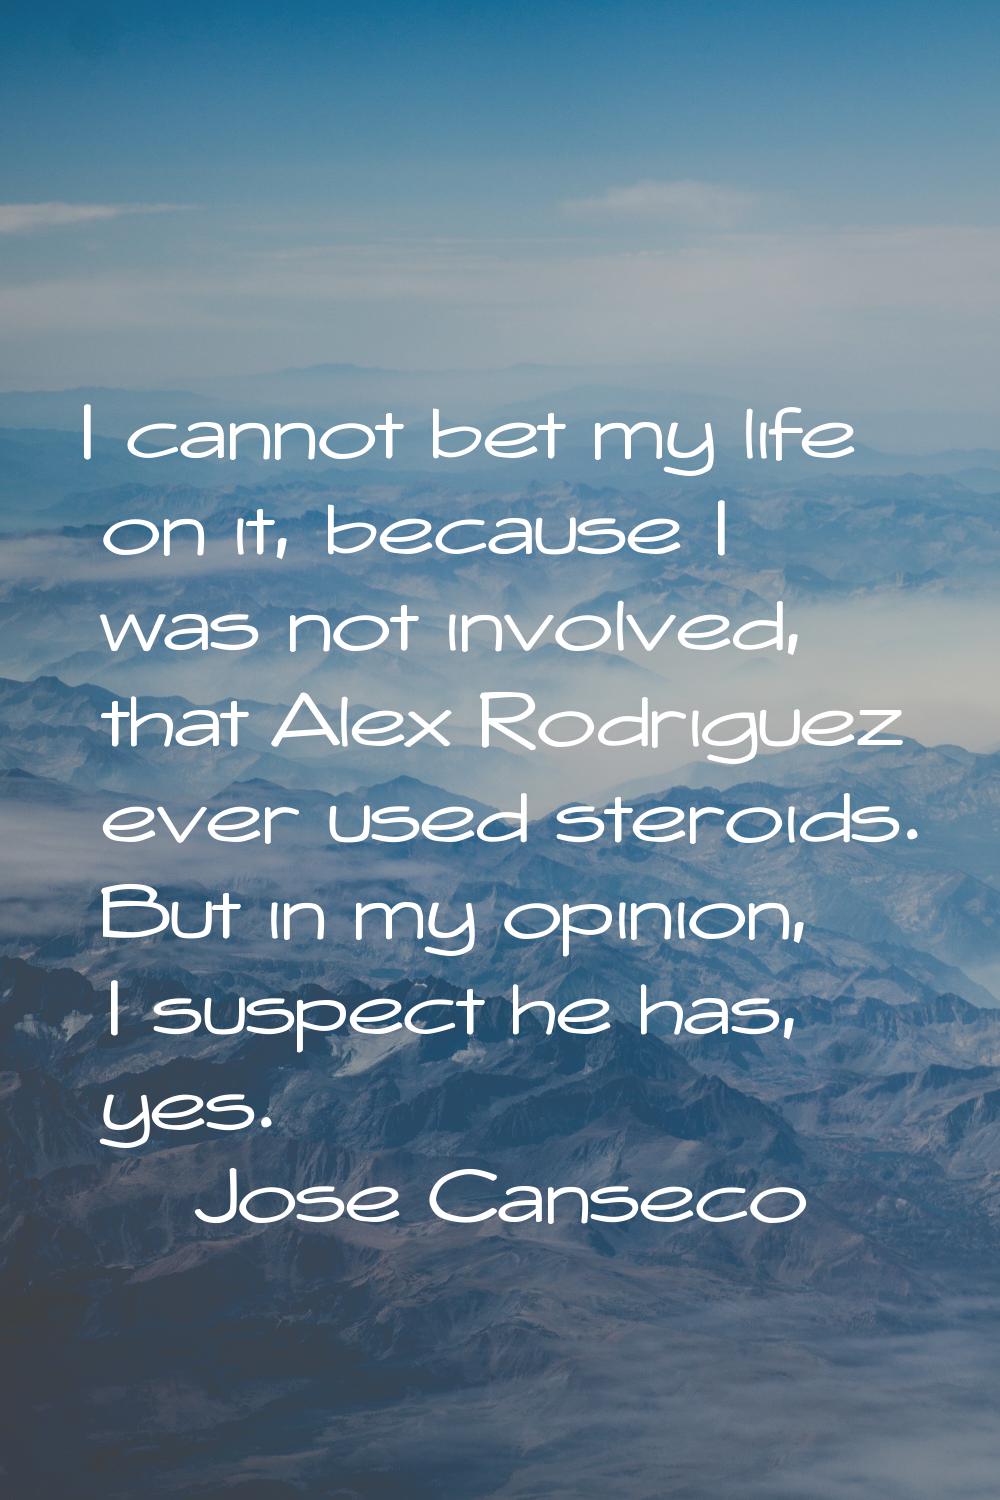 I cannot bet my life on it, because I was not involved, that Alex Rodriguez ever used steroids. But